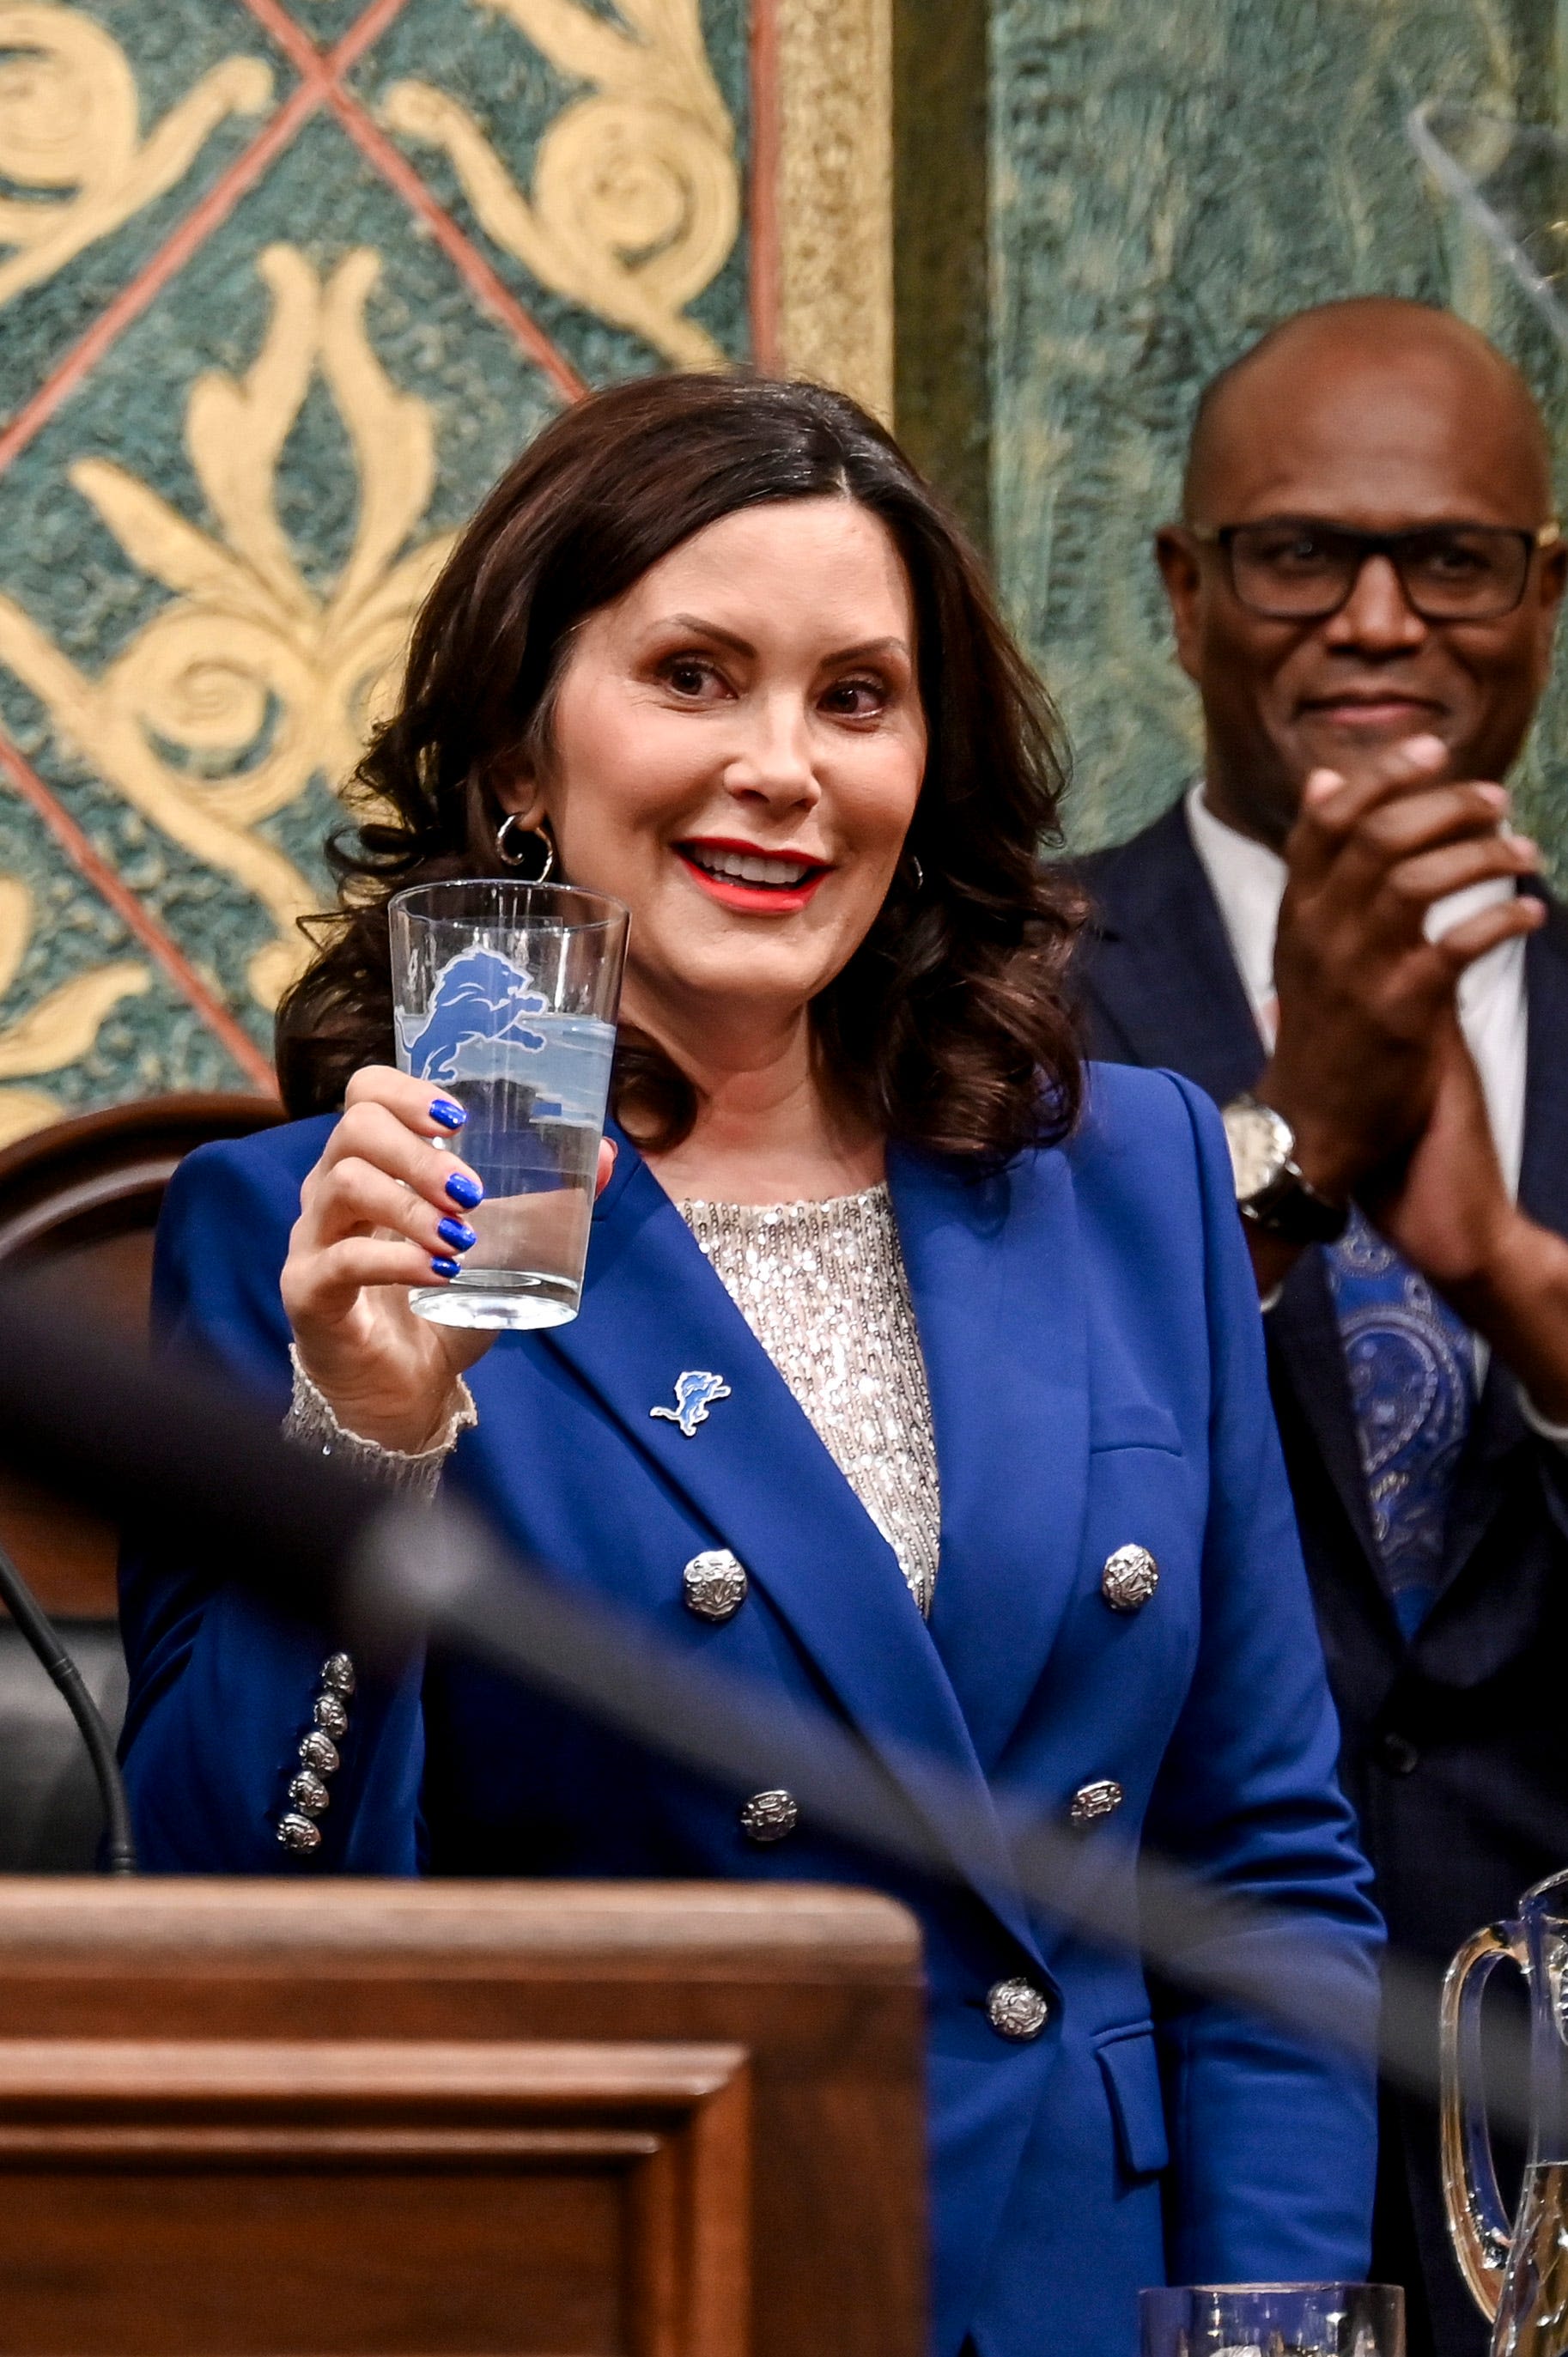 NFL Draft in Detroit touted by Whitmer as big win for city, state